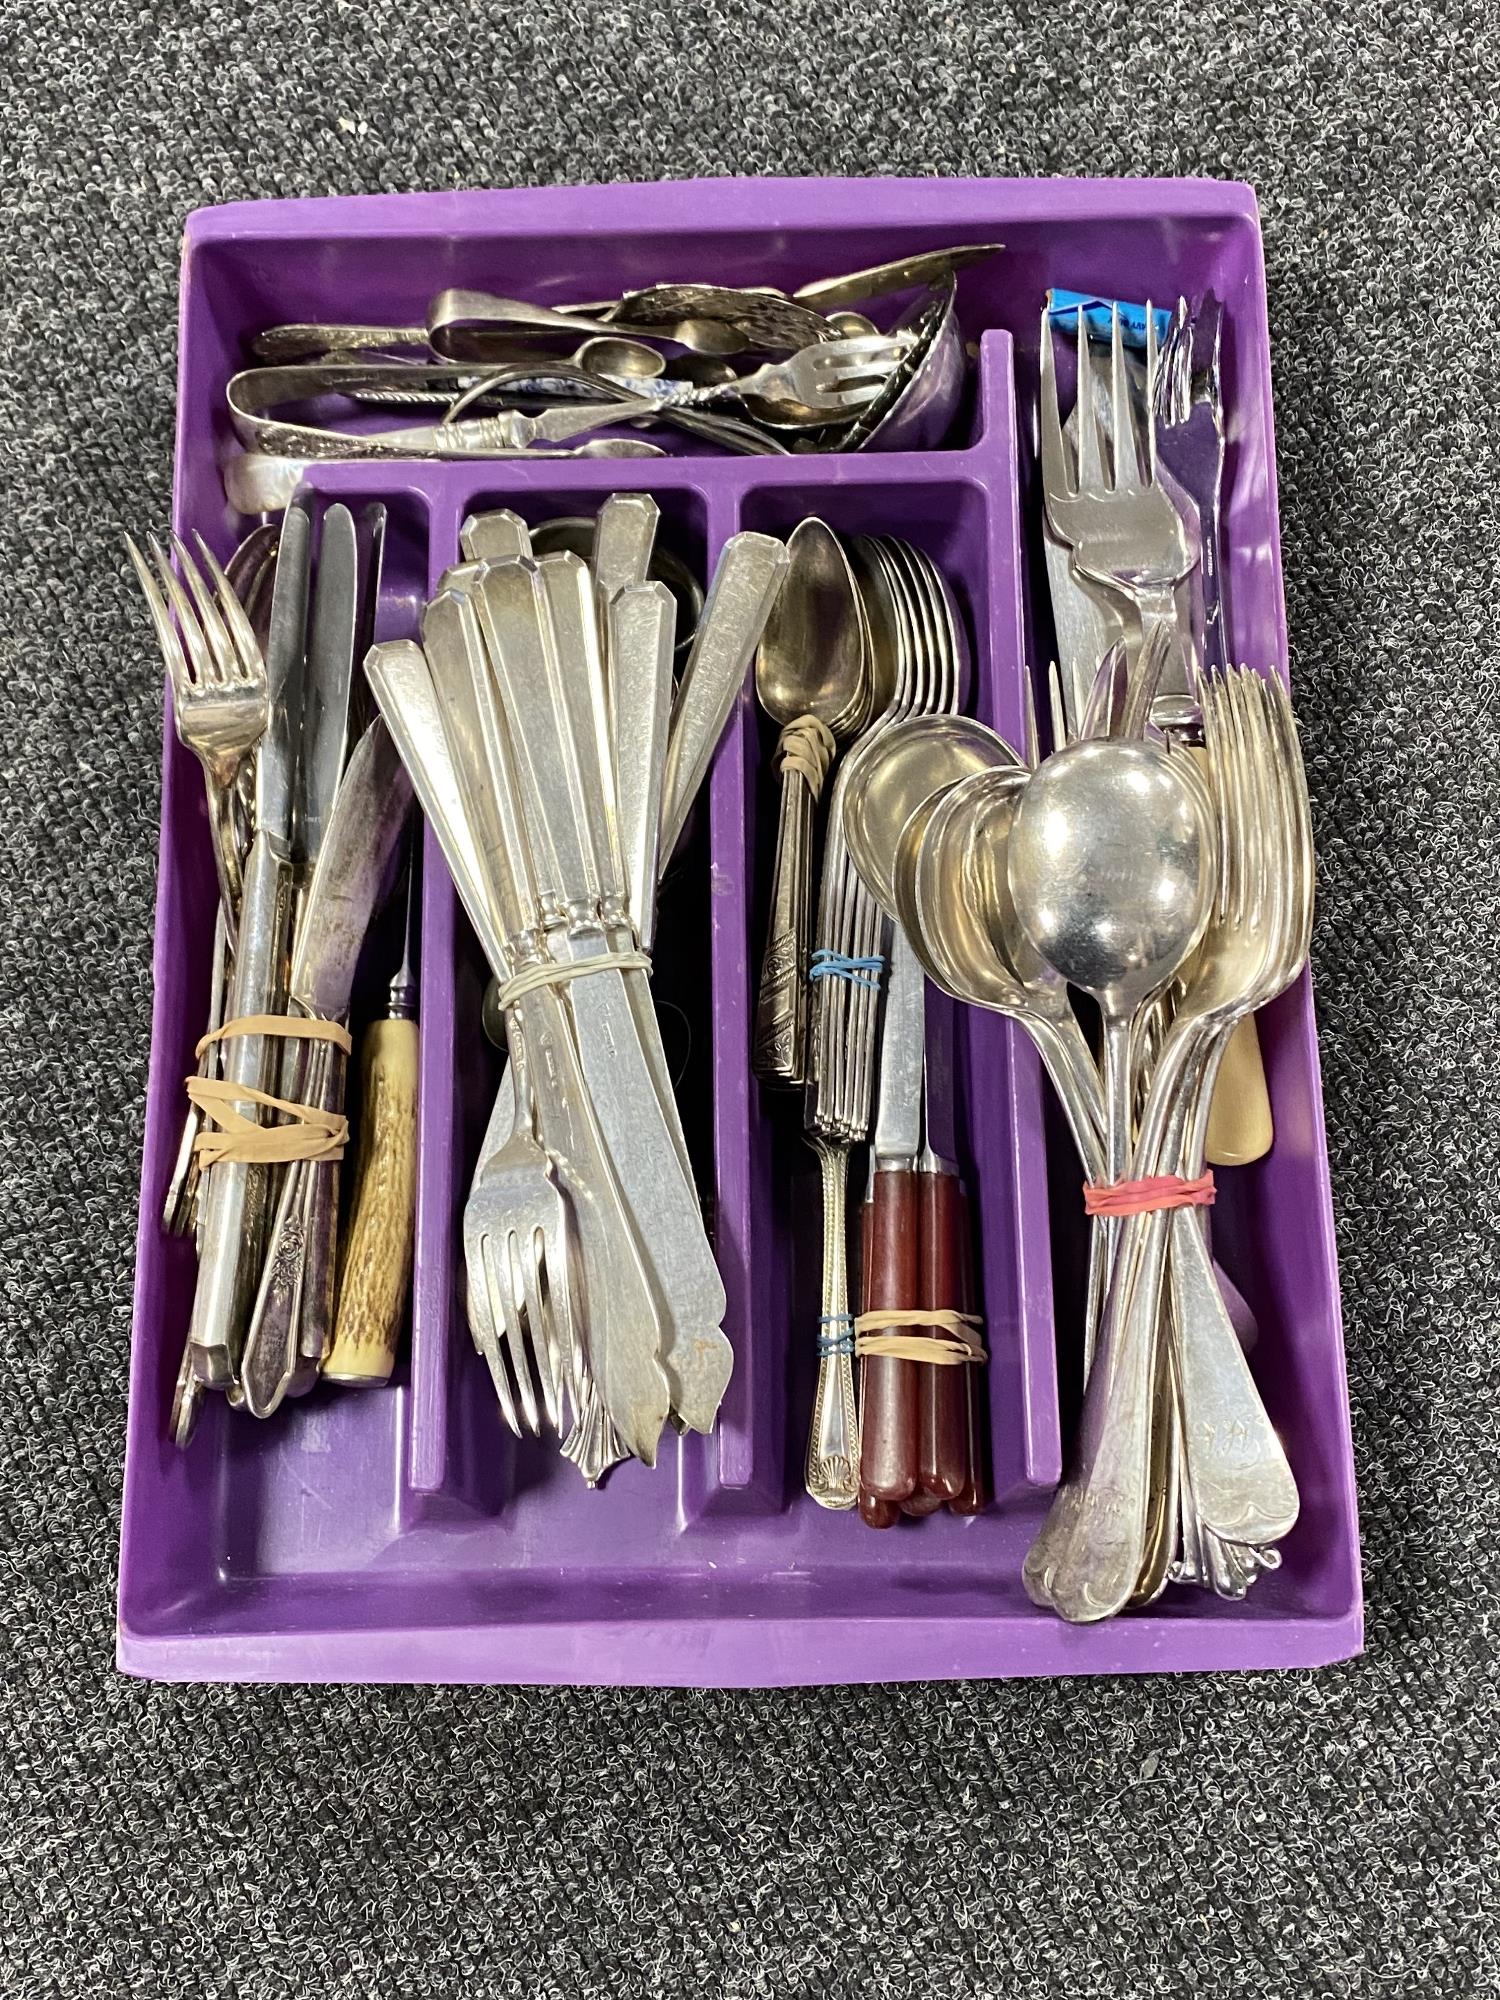 A cutlery tray of assorted plated and stainless steel cutlery